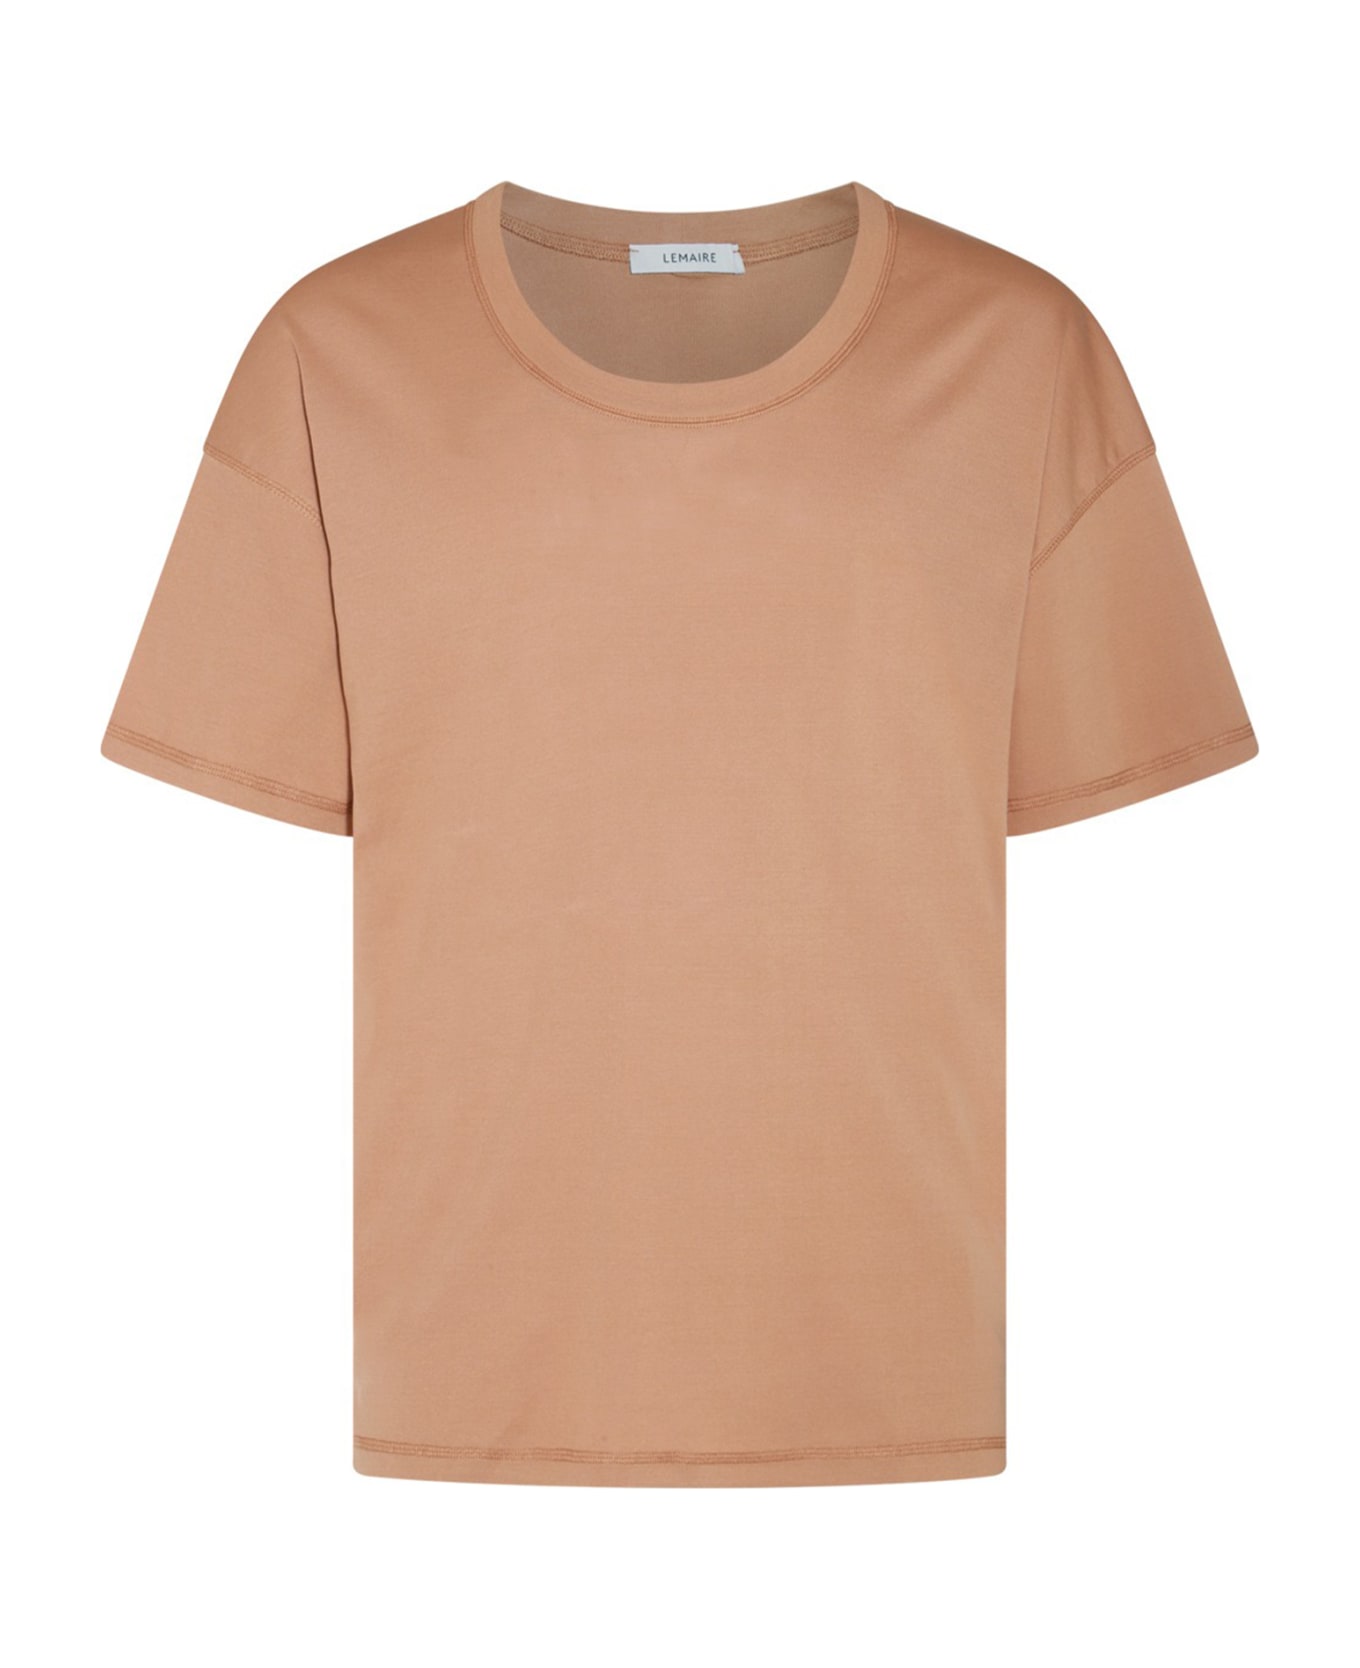 Lemaire T-Shirt - SAND Tシャツ